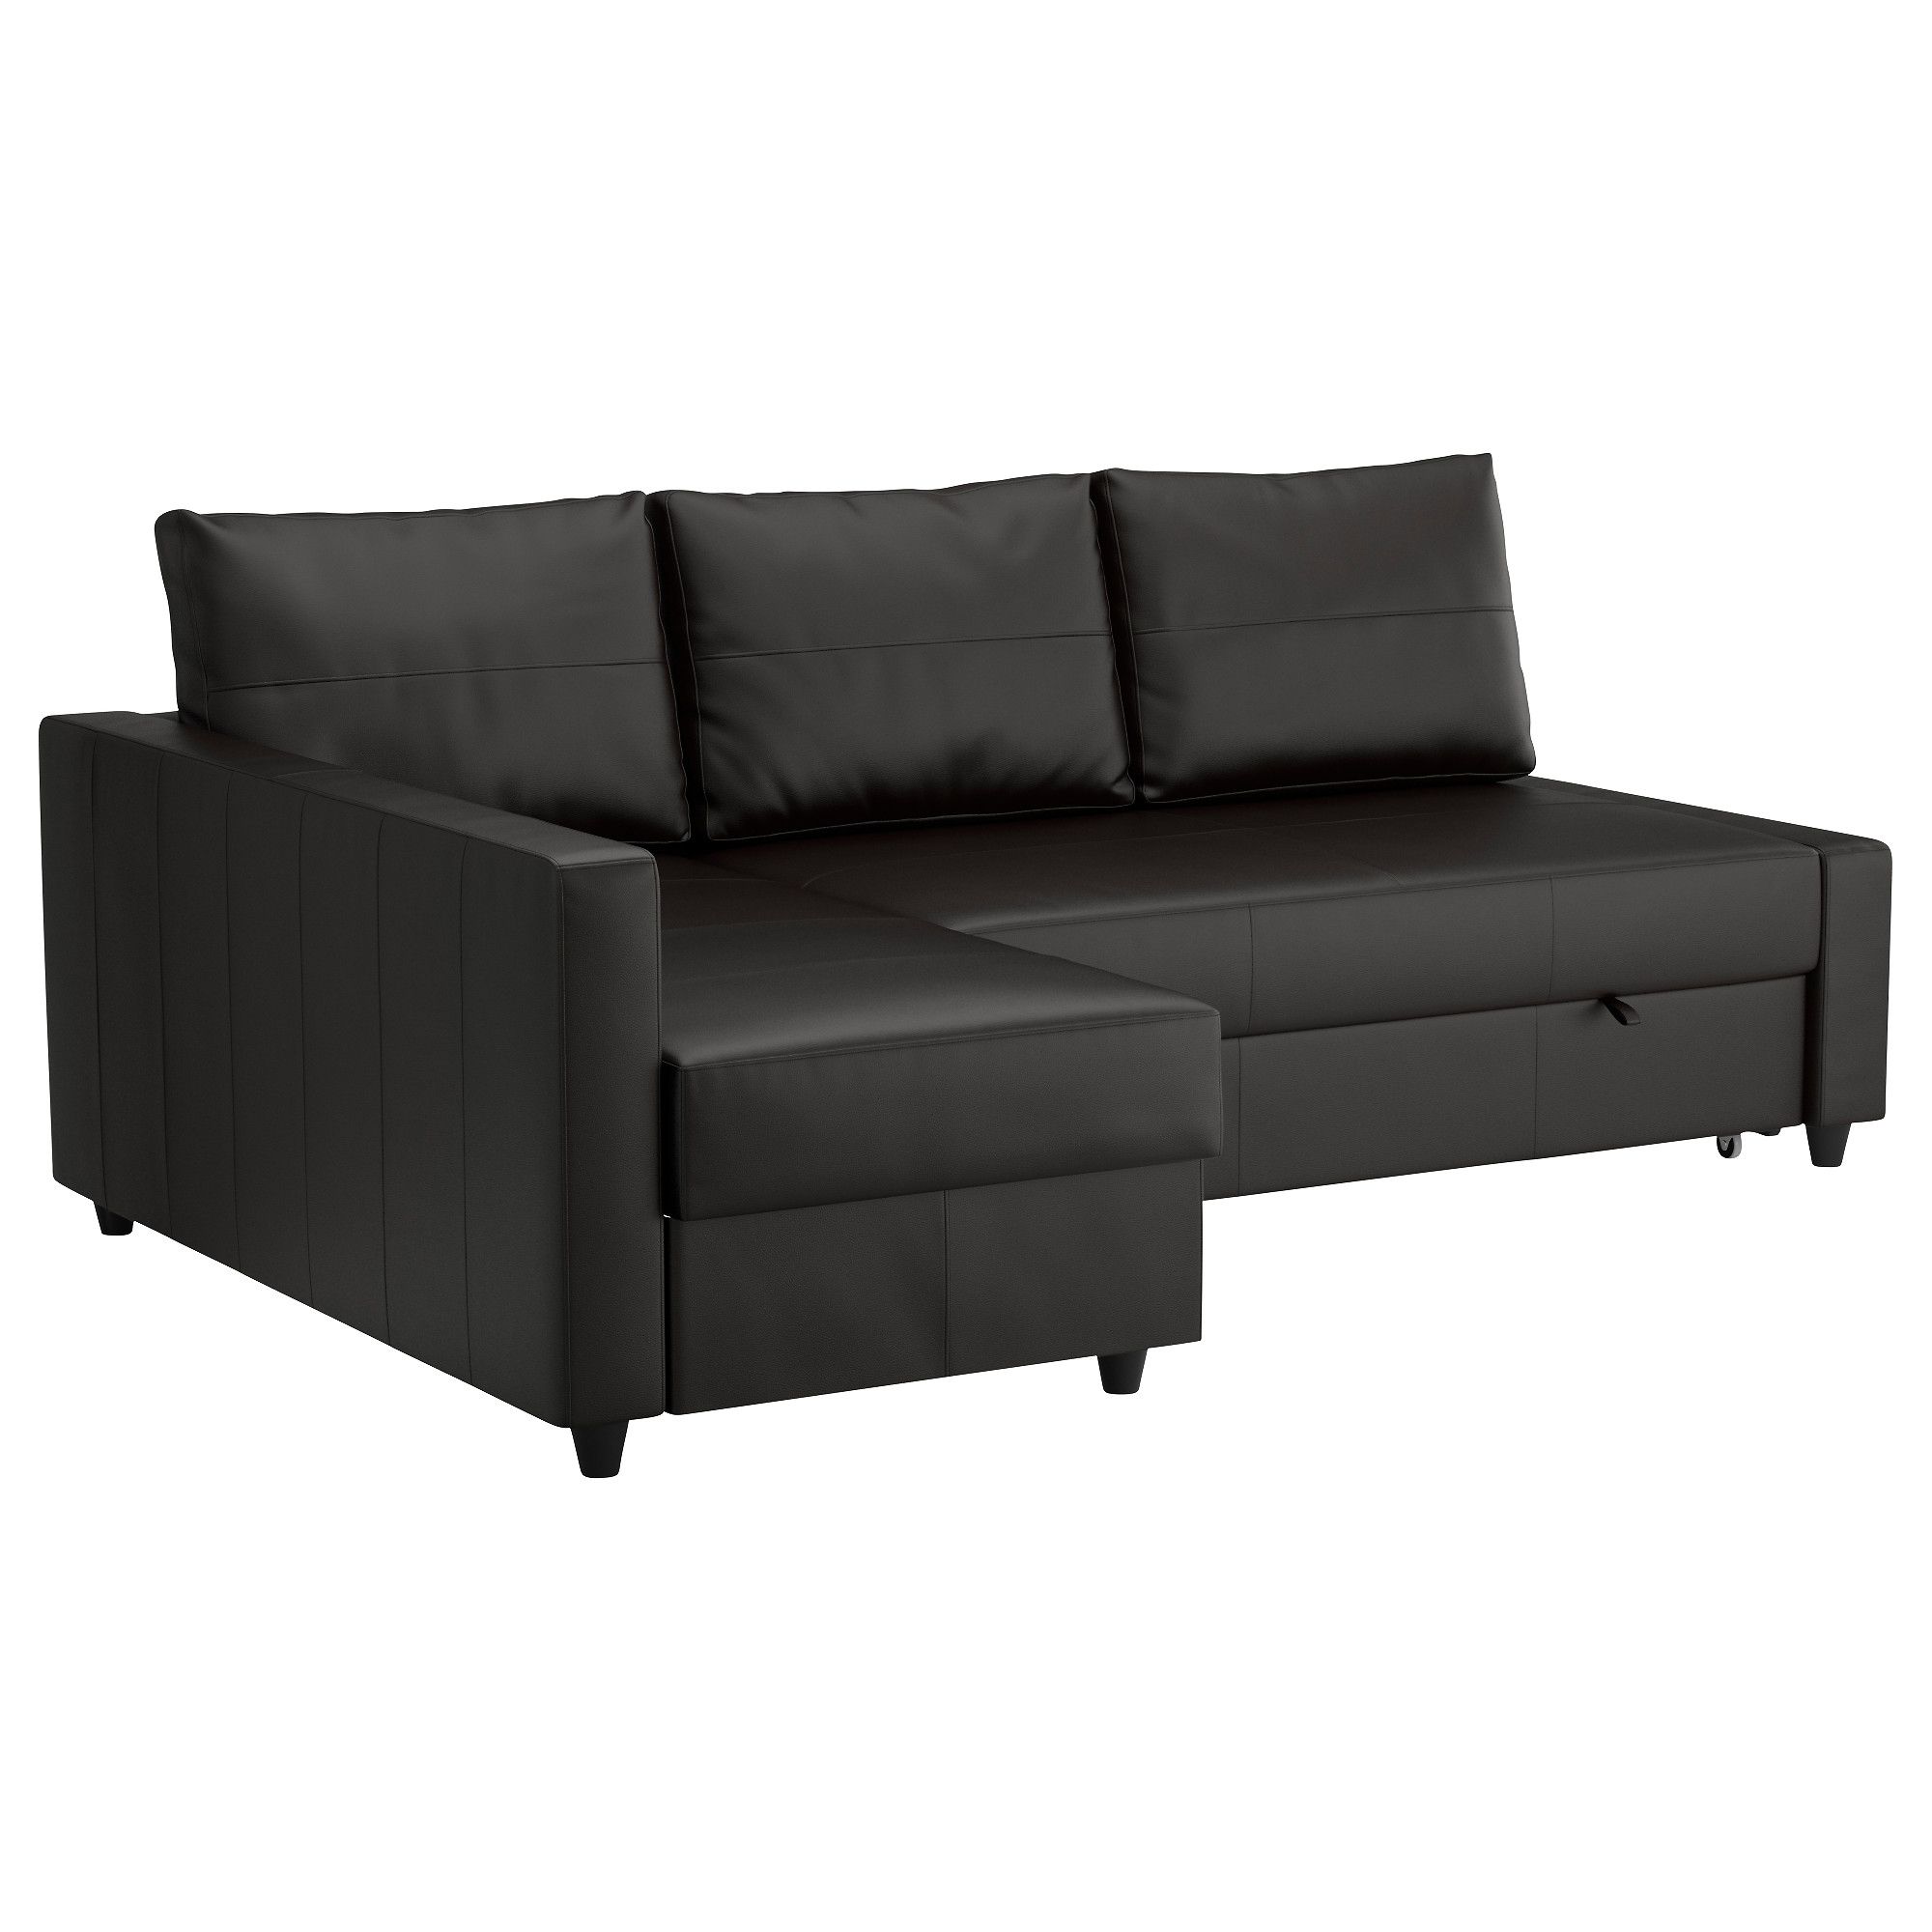 Chaise Lounge Sofa Beds Within Most Popular Friheten Sleeper Sectional,3 Seat W/storage – Skiftebo Dark Gray (View 3 of 15)